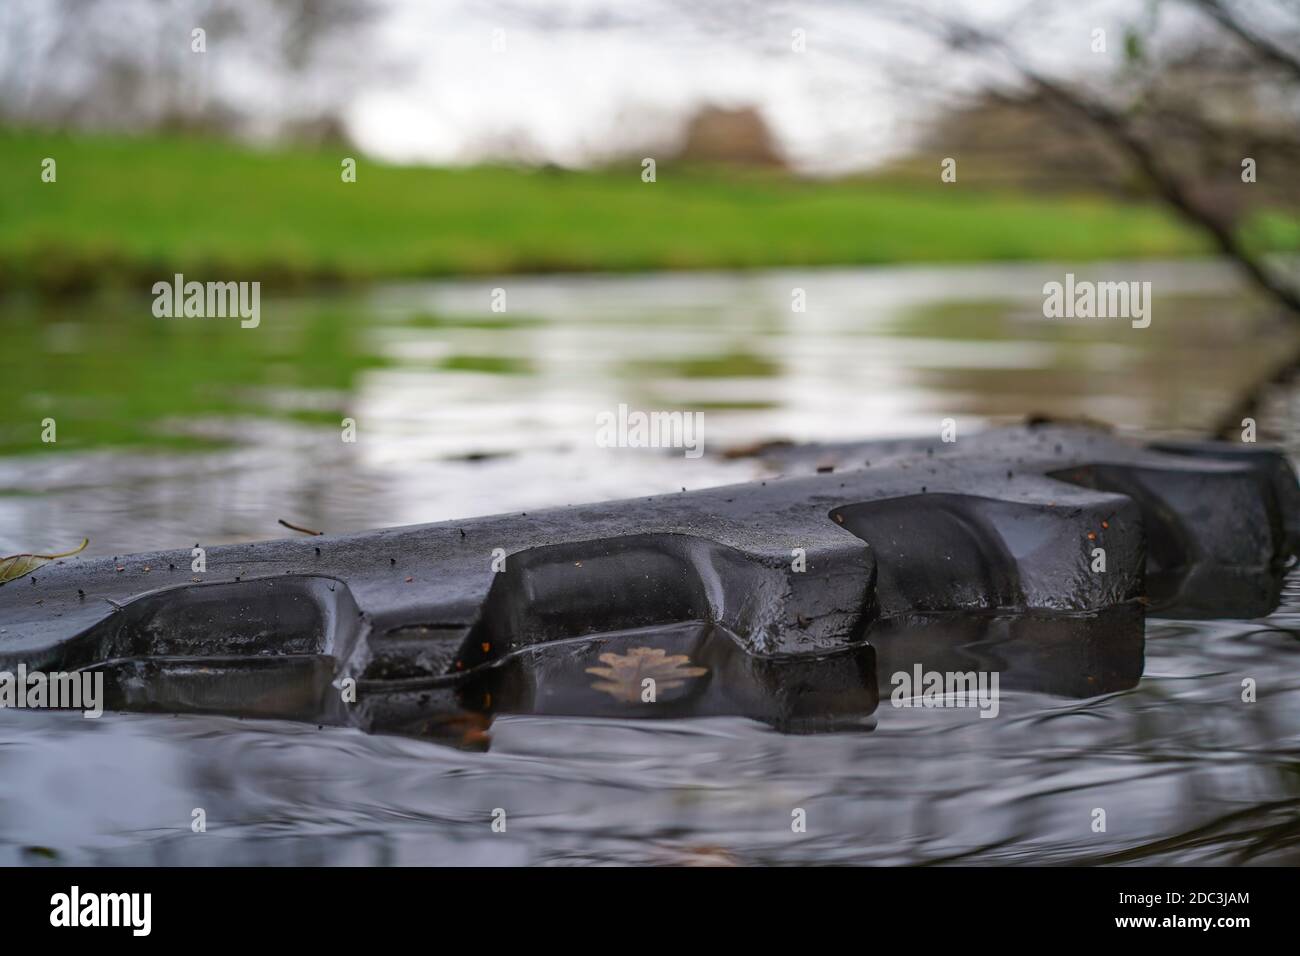 Close up of old JCB vehicle tyre thrown as litter/debris into UK canal seen here partially submerged in water. Eyesore rubbish spoiling countryside. Stock Photo